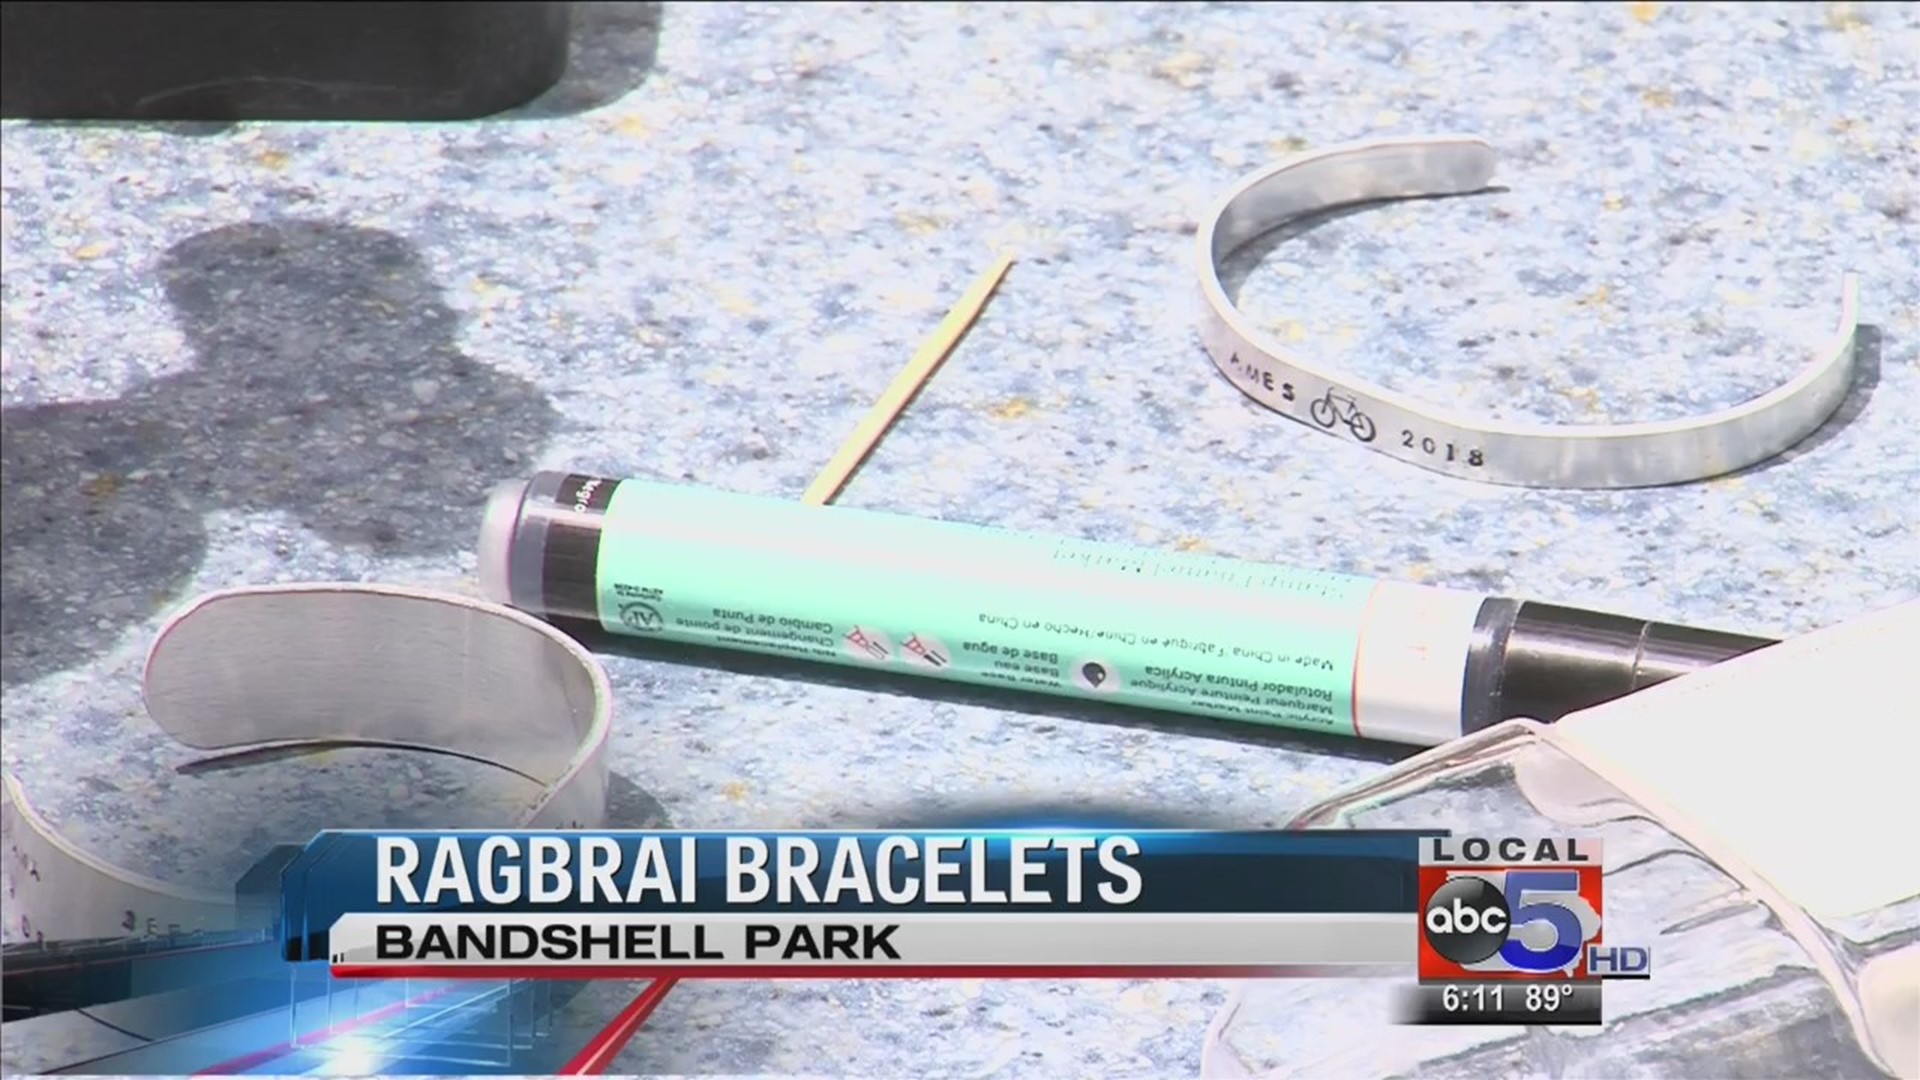 Personalized bracelets available to RAGBRAI riders